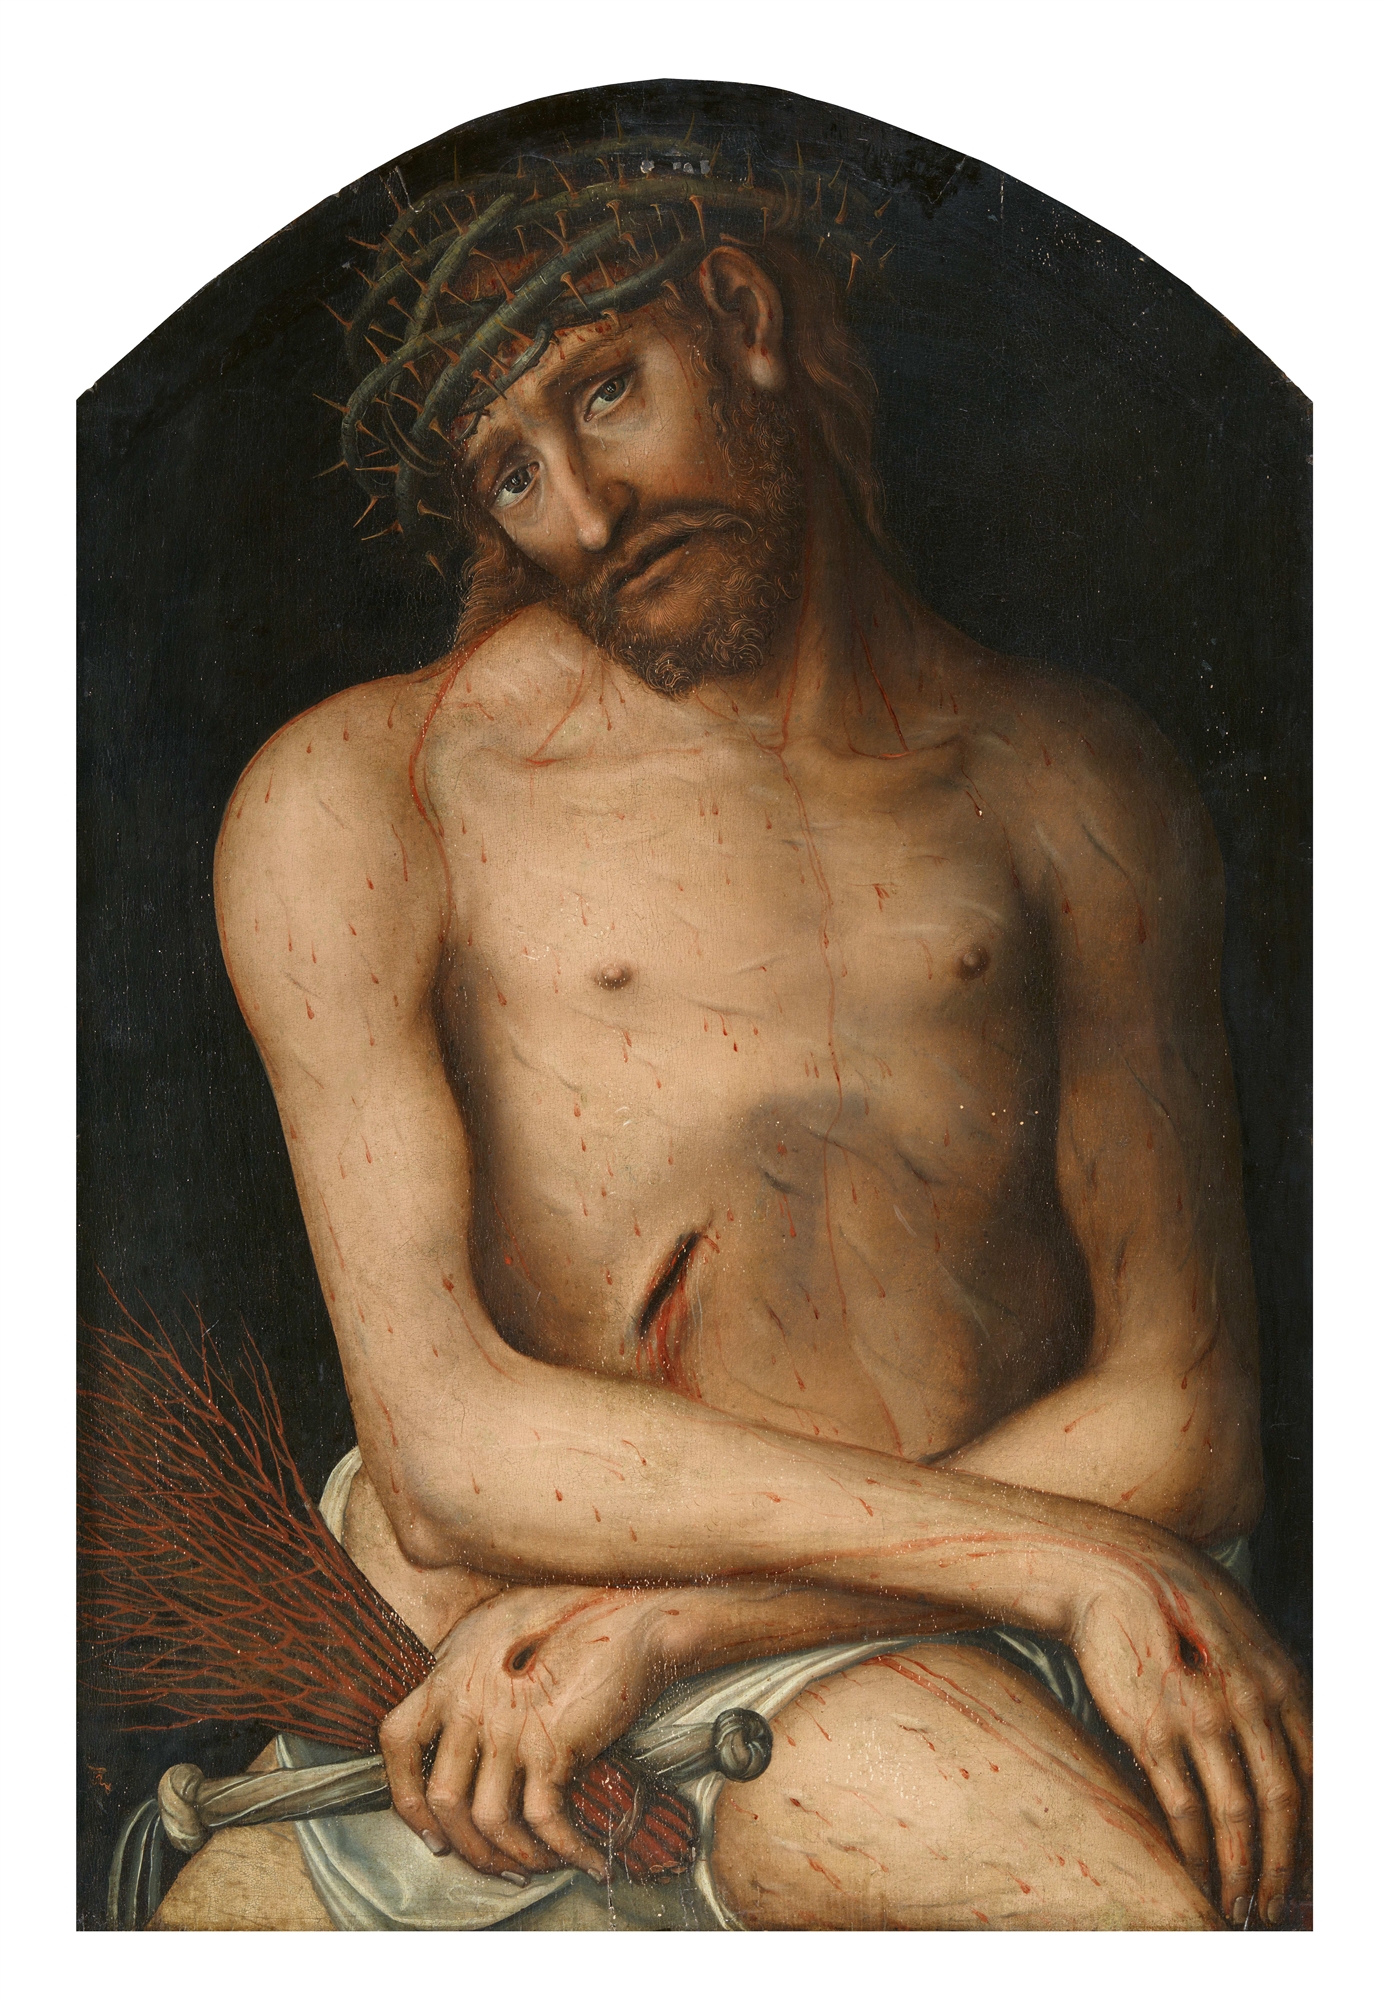 Lucas Cranach the Elder and workshop, Christ as the Man of Sorrows